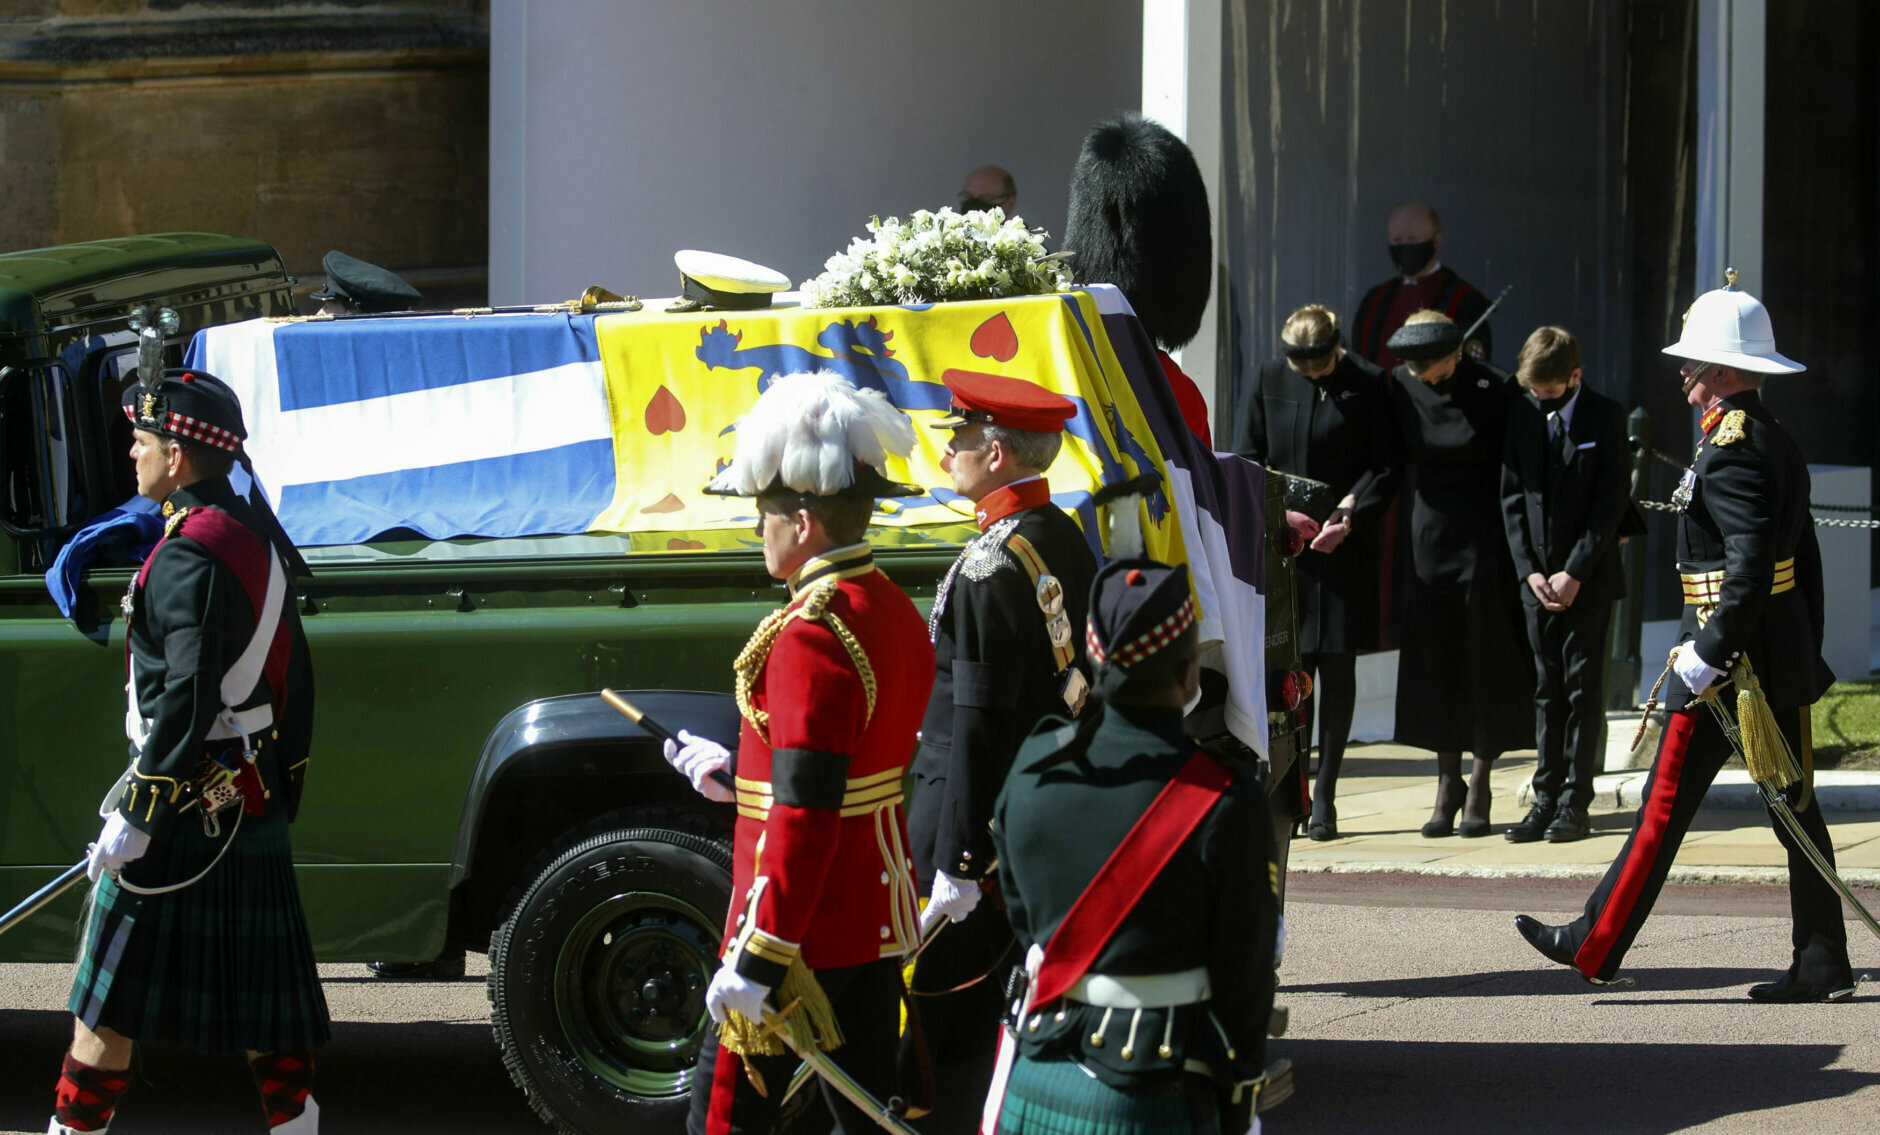 The Duke of Edinburgh's coffin, covered with his Personal Standard, is carried on the purpose built Land Rover Defender, drives past from left Lady Louise Windsor, the Countess of Wessex and James, Viscount Severn with heads bowed, at the Galilee Porch of St George's Chapel, at Windsor Castle, Windsor, England, Saturday April 17, 2021, during the funeral of Britain's Prince Philip. Prince Philip died April 9 at the age of 99 after 73 years of marriage to Britain's Queen Elizabeth II. (Steve Parsons/Pool via AP)